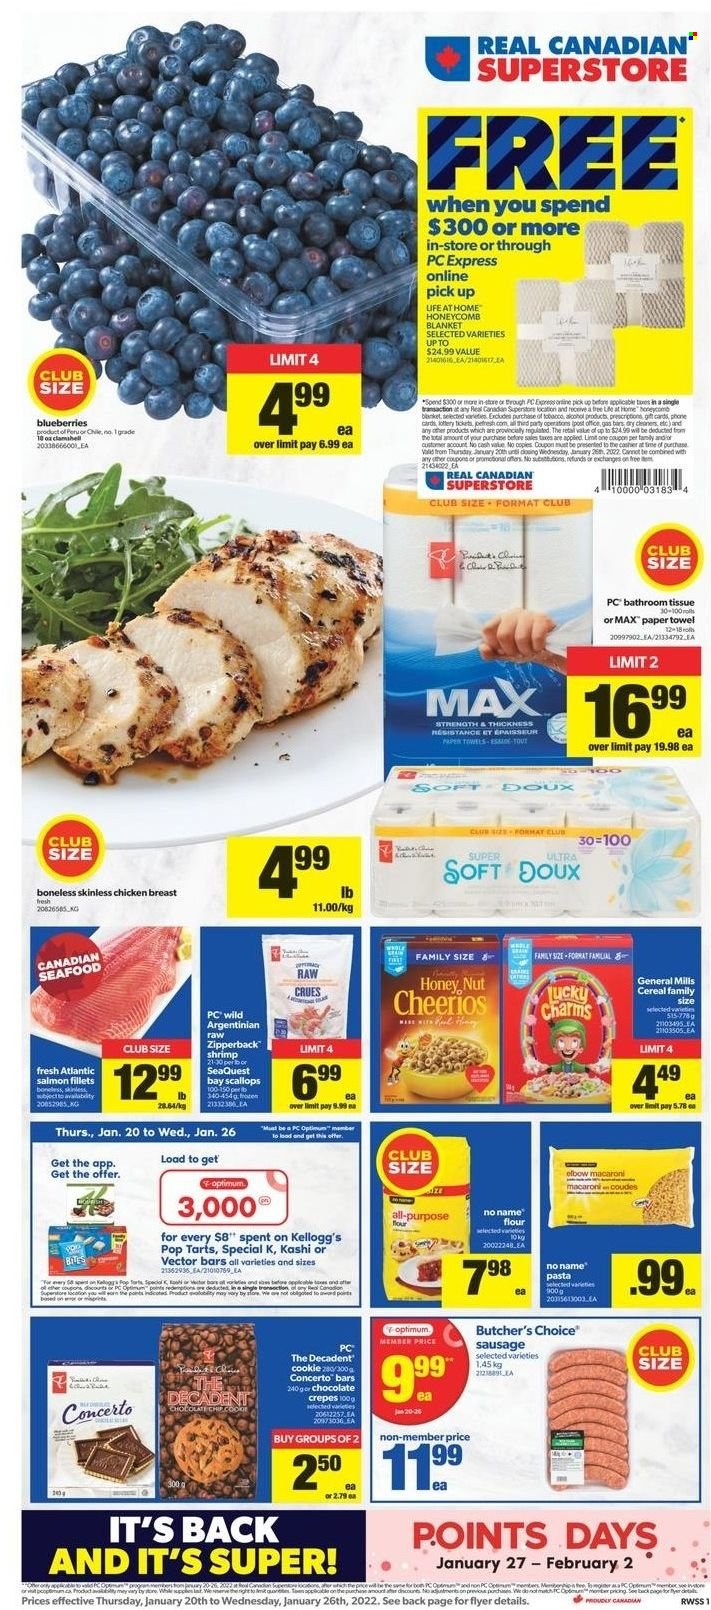 thumbnail - Real Canadian Superstore Flyer - January 20, 2022 - January 26, 2022 - Sales products - blueberries, salmon, salmon fillet, scallops, seafood, shrimps, No Name, pasta, sausage, chocolate, Kellogg's, Pop-Tarts, flour, cereals, Cheerios, chicken breasts, chicken, bath tissue, Rin, paper, blanket, towel. Page 1.